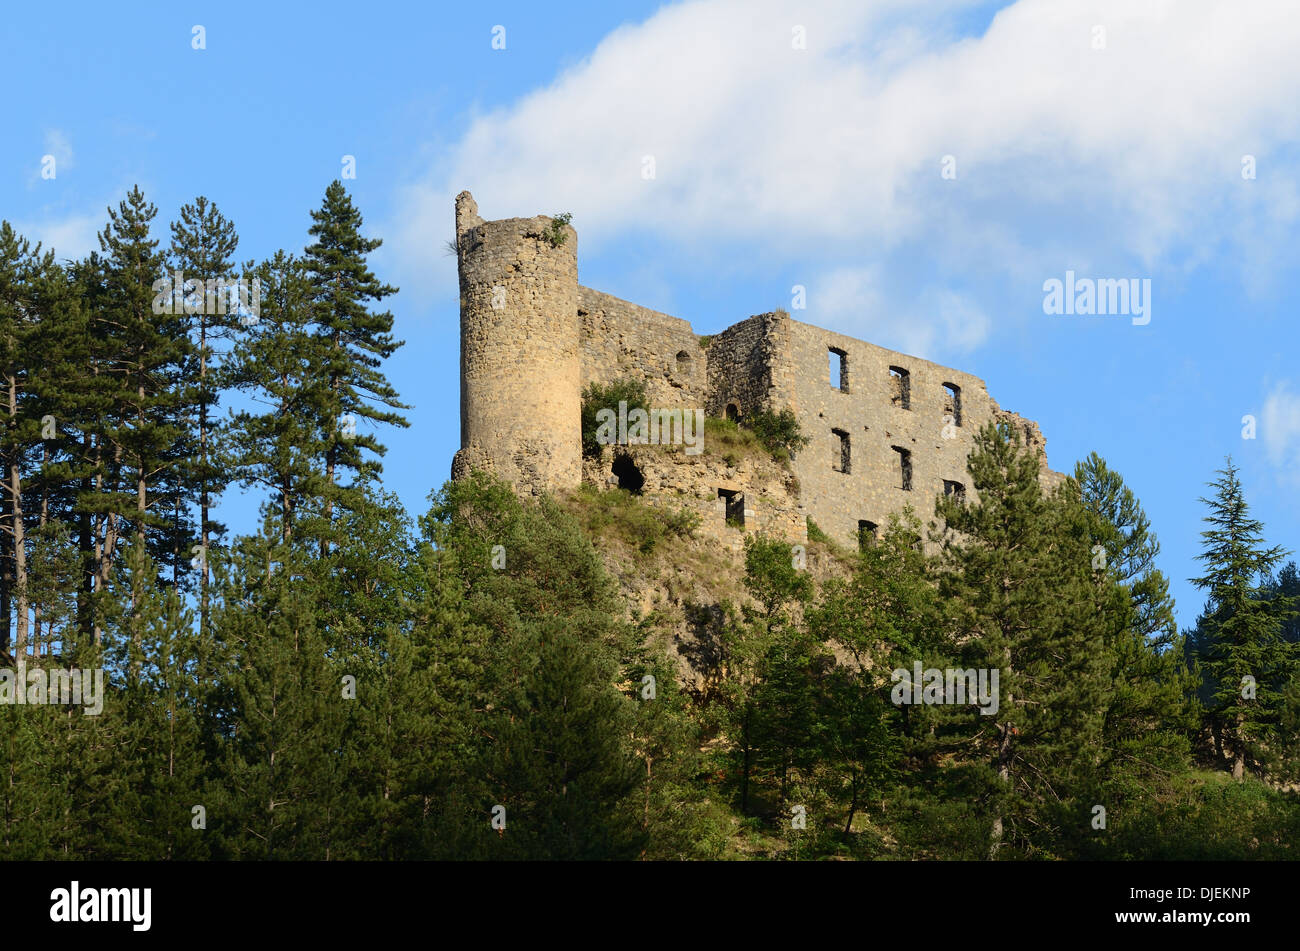 Medieval Castle or Château Reine Jeanne in Guillaumes in the Haut-Var Valley Alpes-Maritimes France Stock Photo